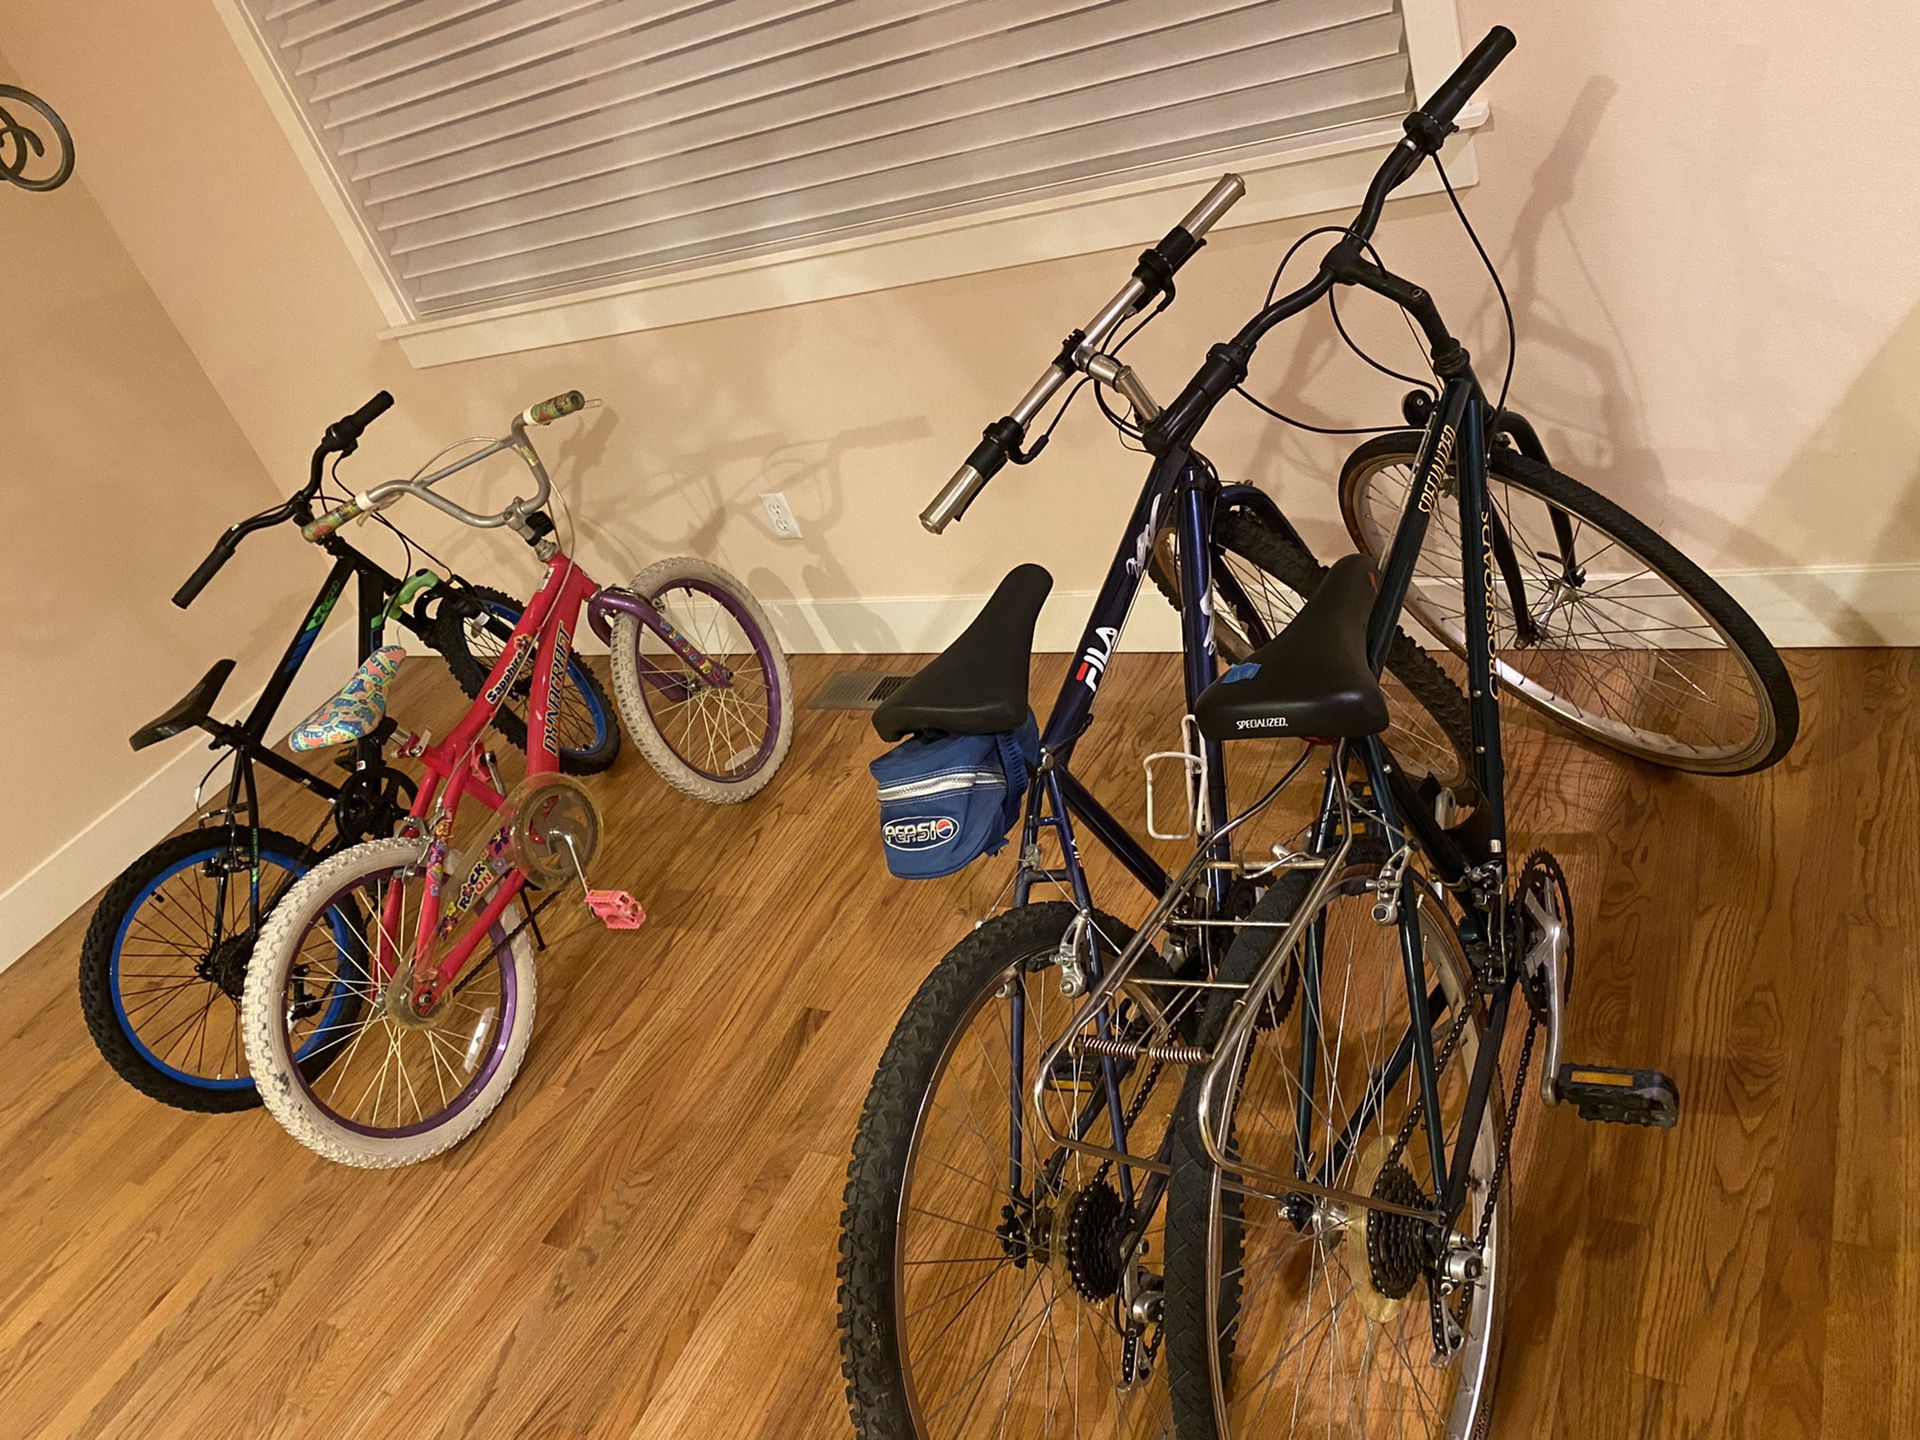 All bike for sell or individual